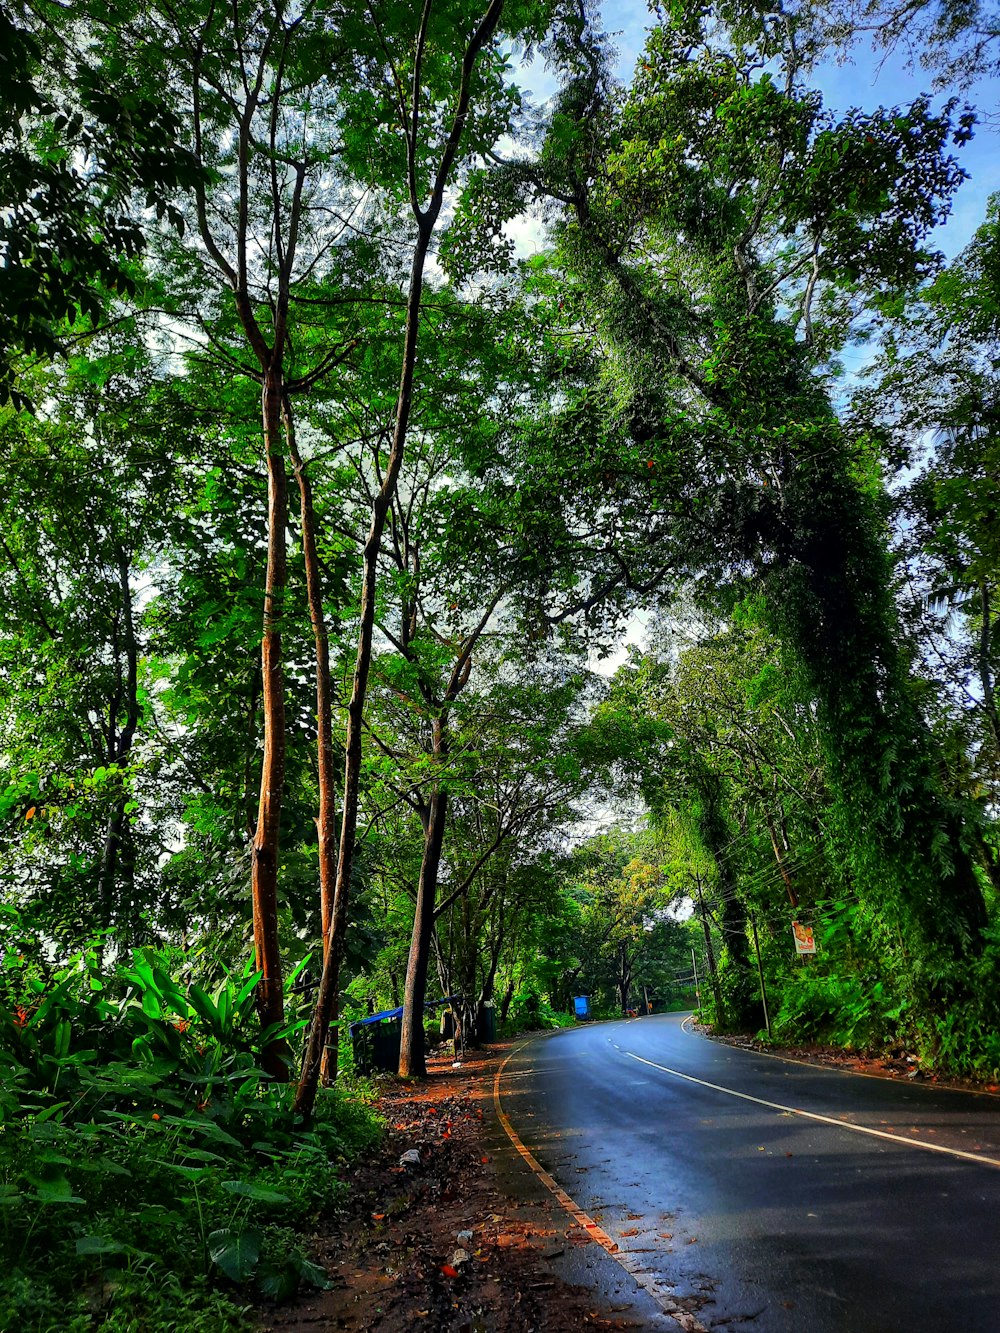 a road surrounded by lush green trees on a sunny day